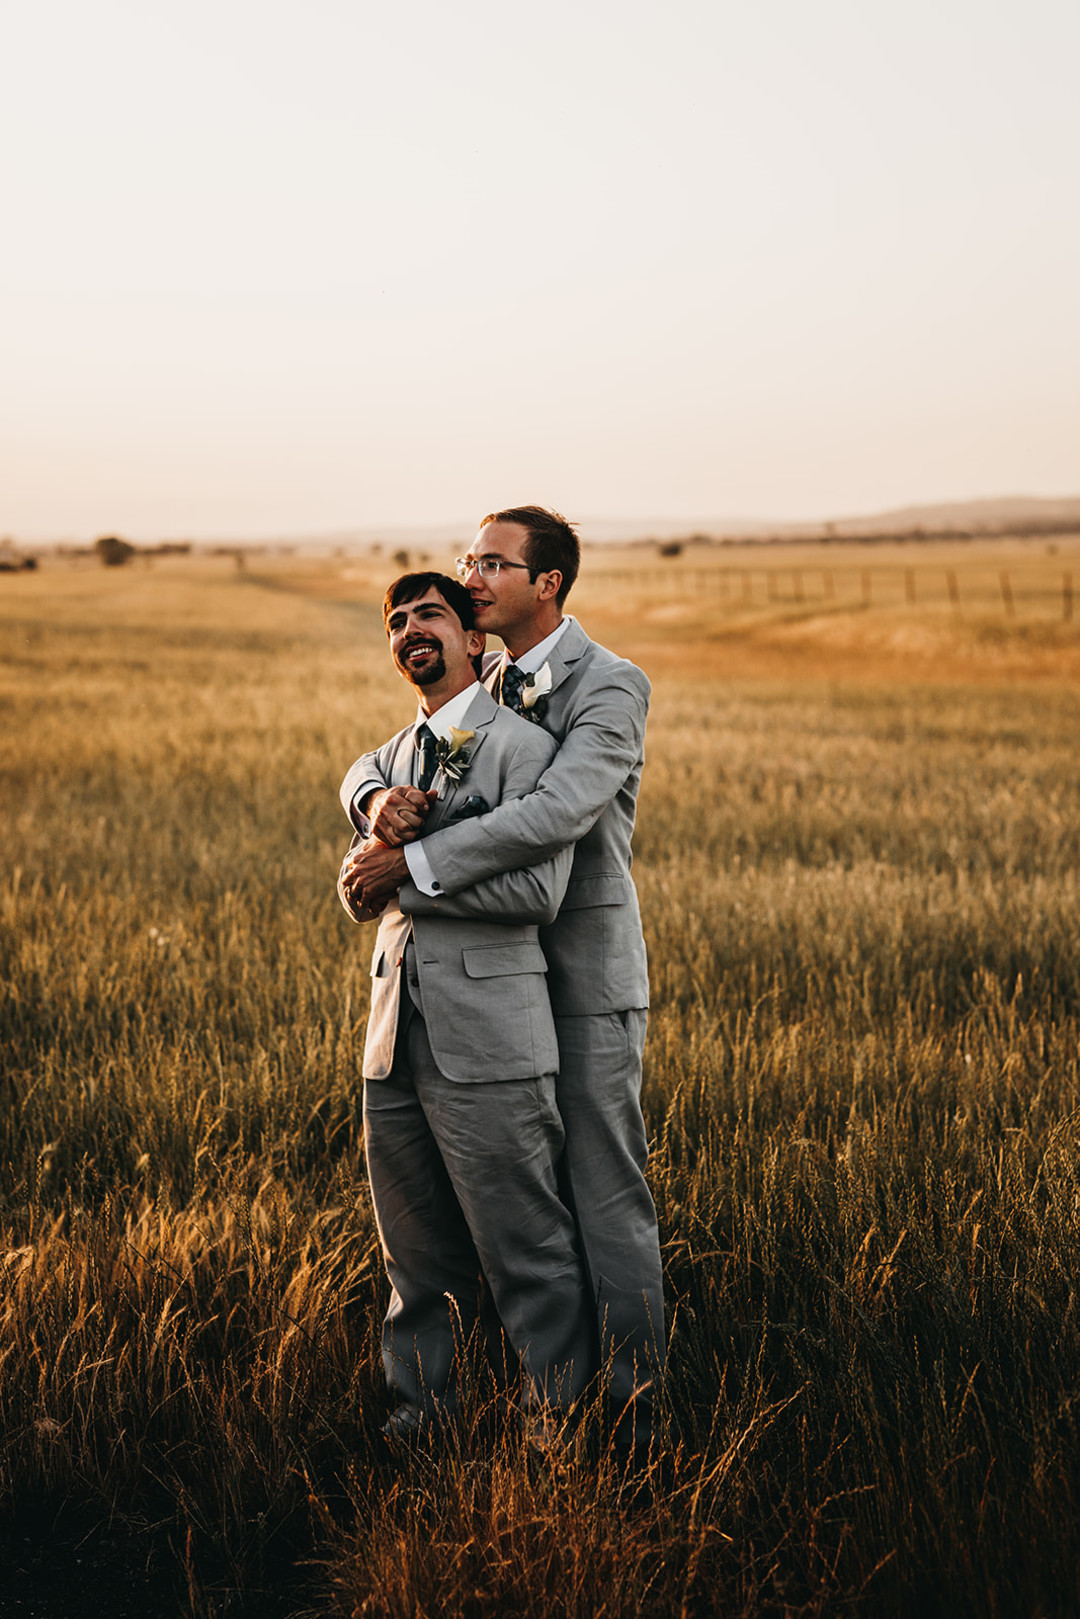 Rustic countryside spring wedding at California Woods Nature Preserve LGBTQ+ weddings gay wedding two grooms moody photojournalist nature outside field